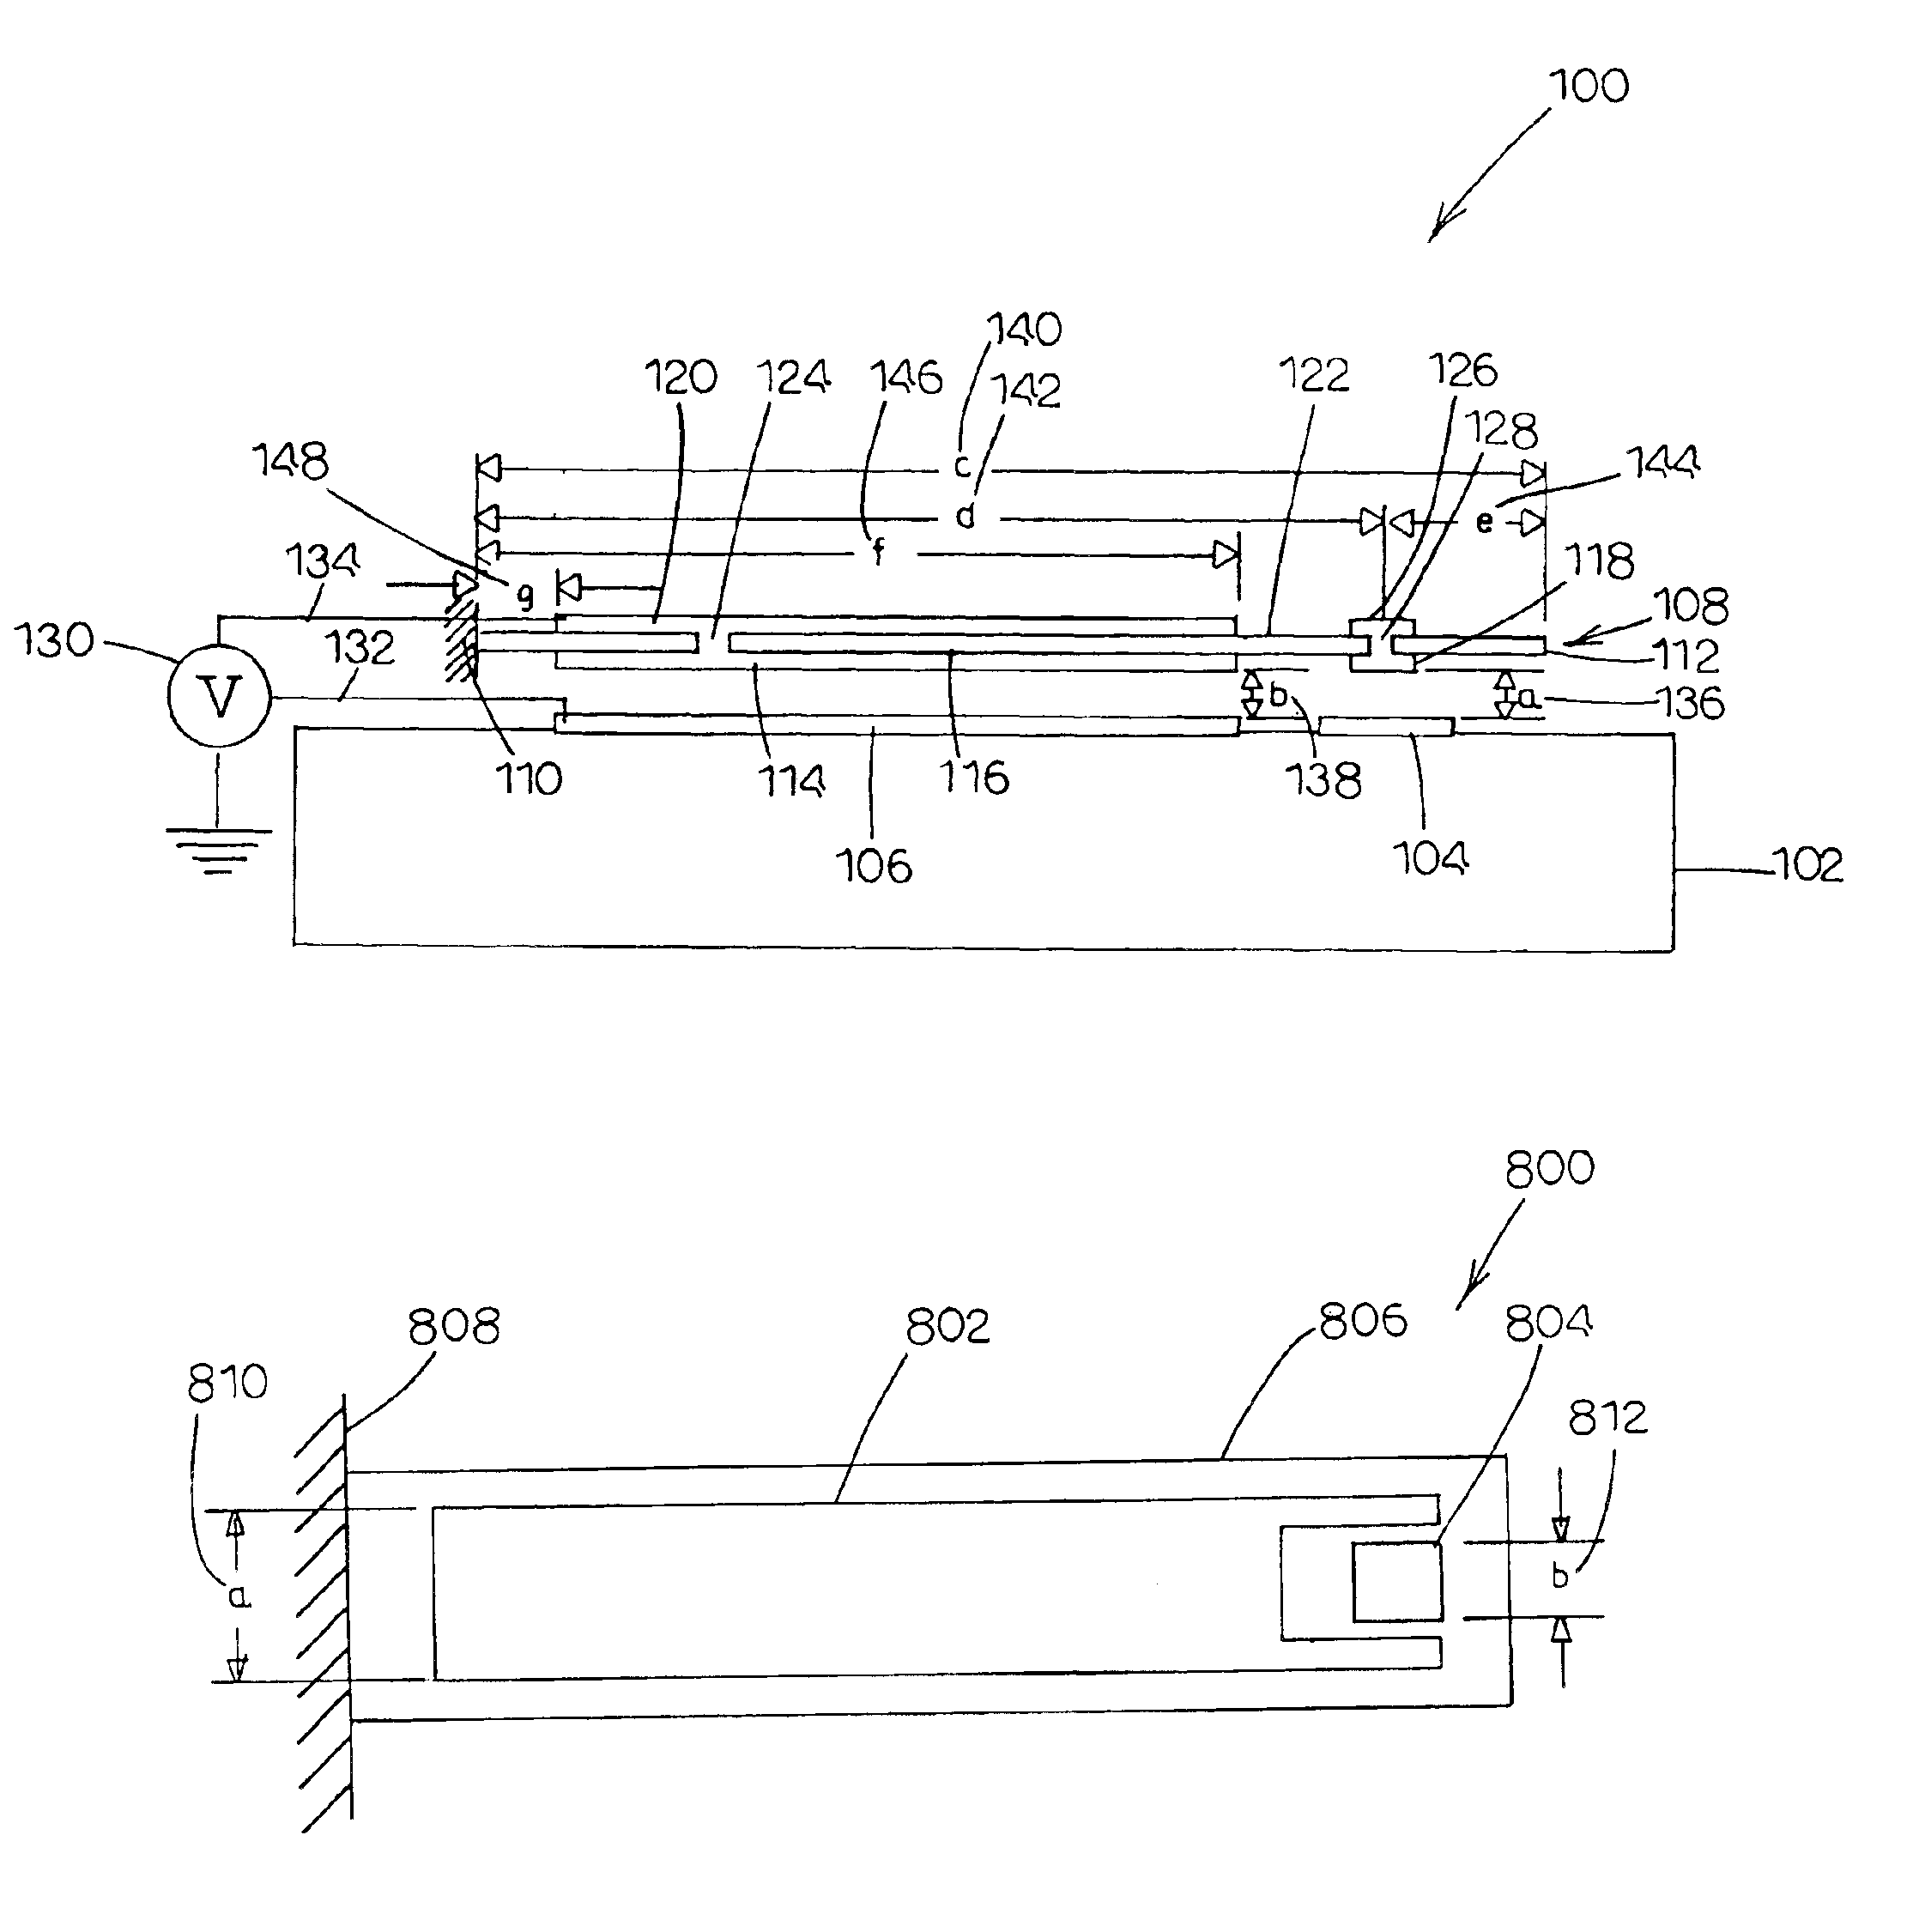 MEMS device having a trilayered beam and related methods